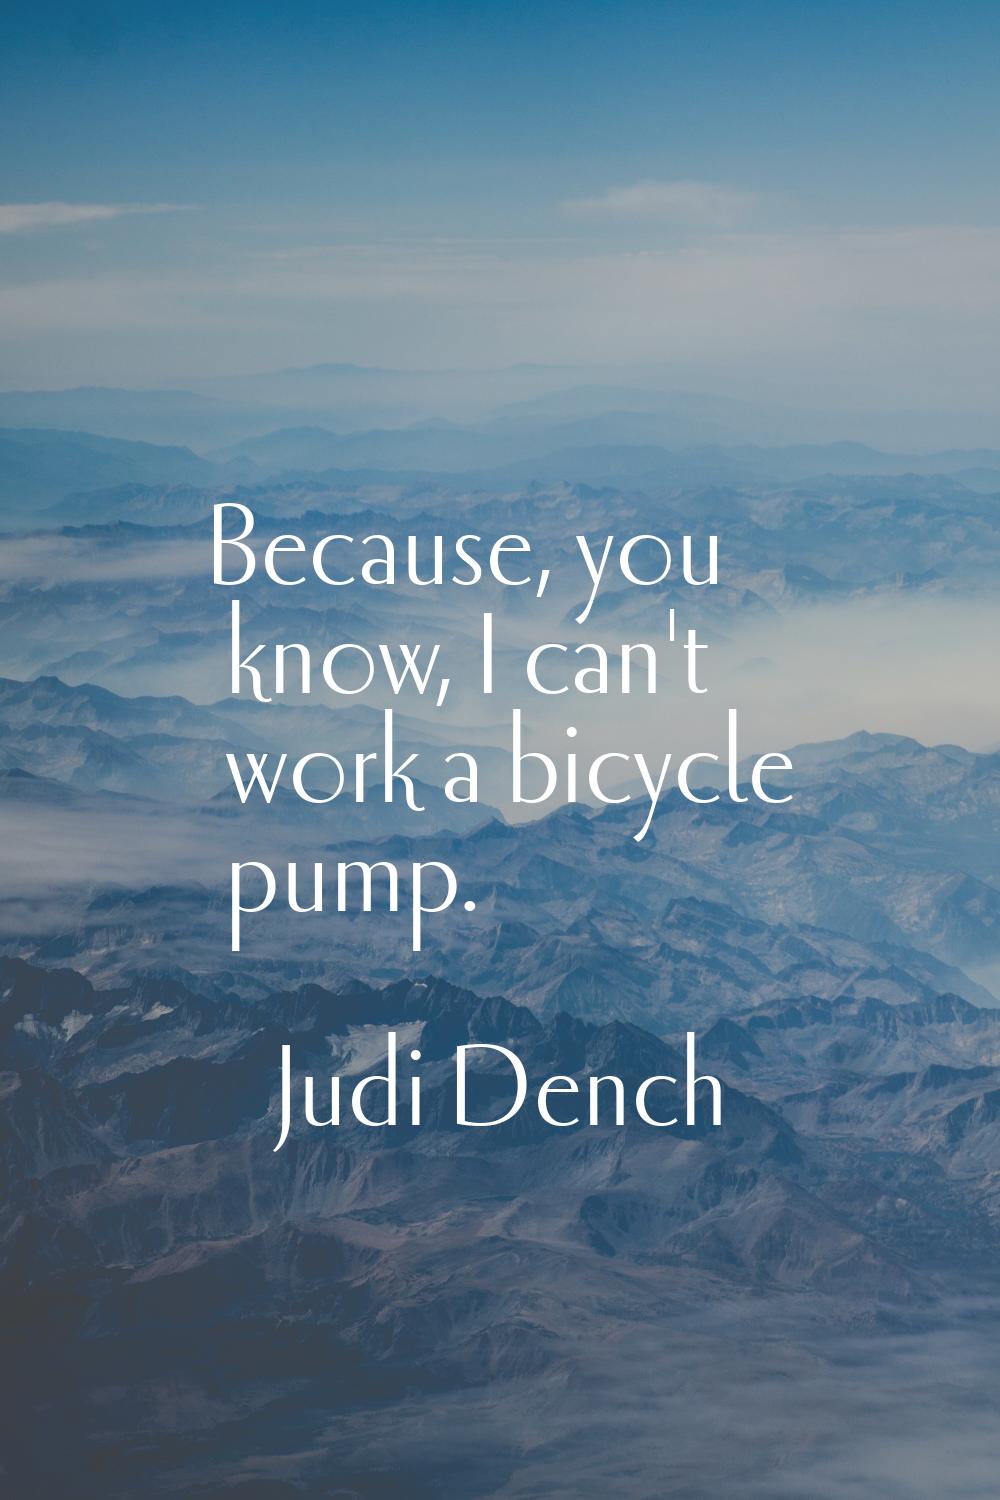 Because, you know, I can't work a bicycle pump.